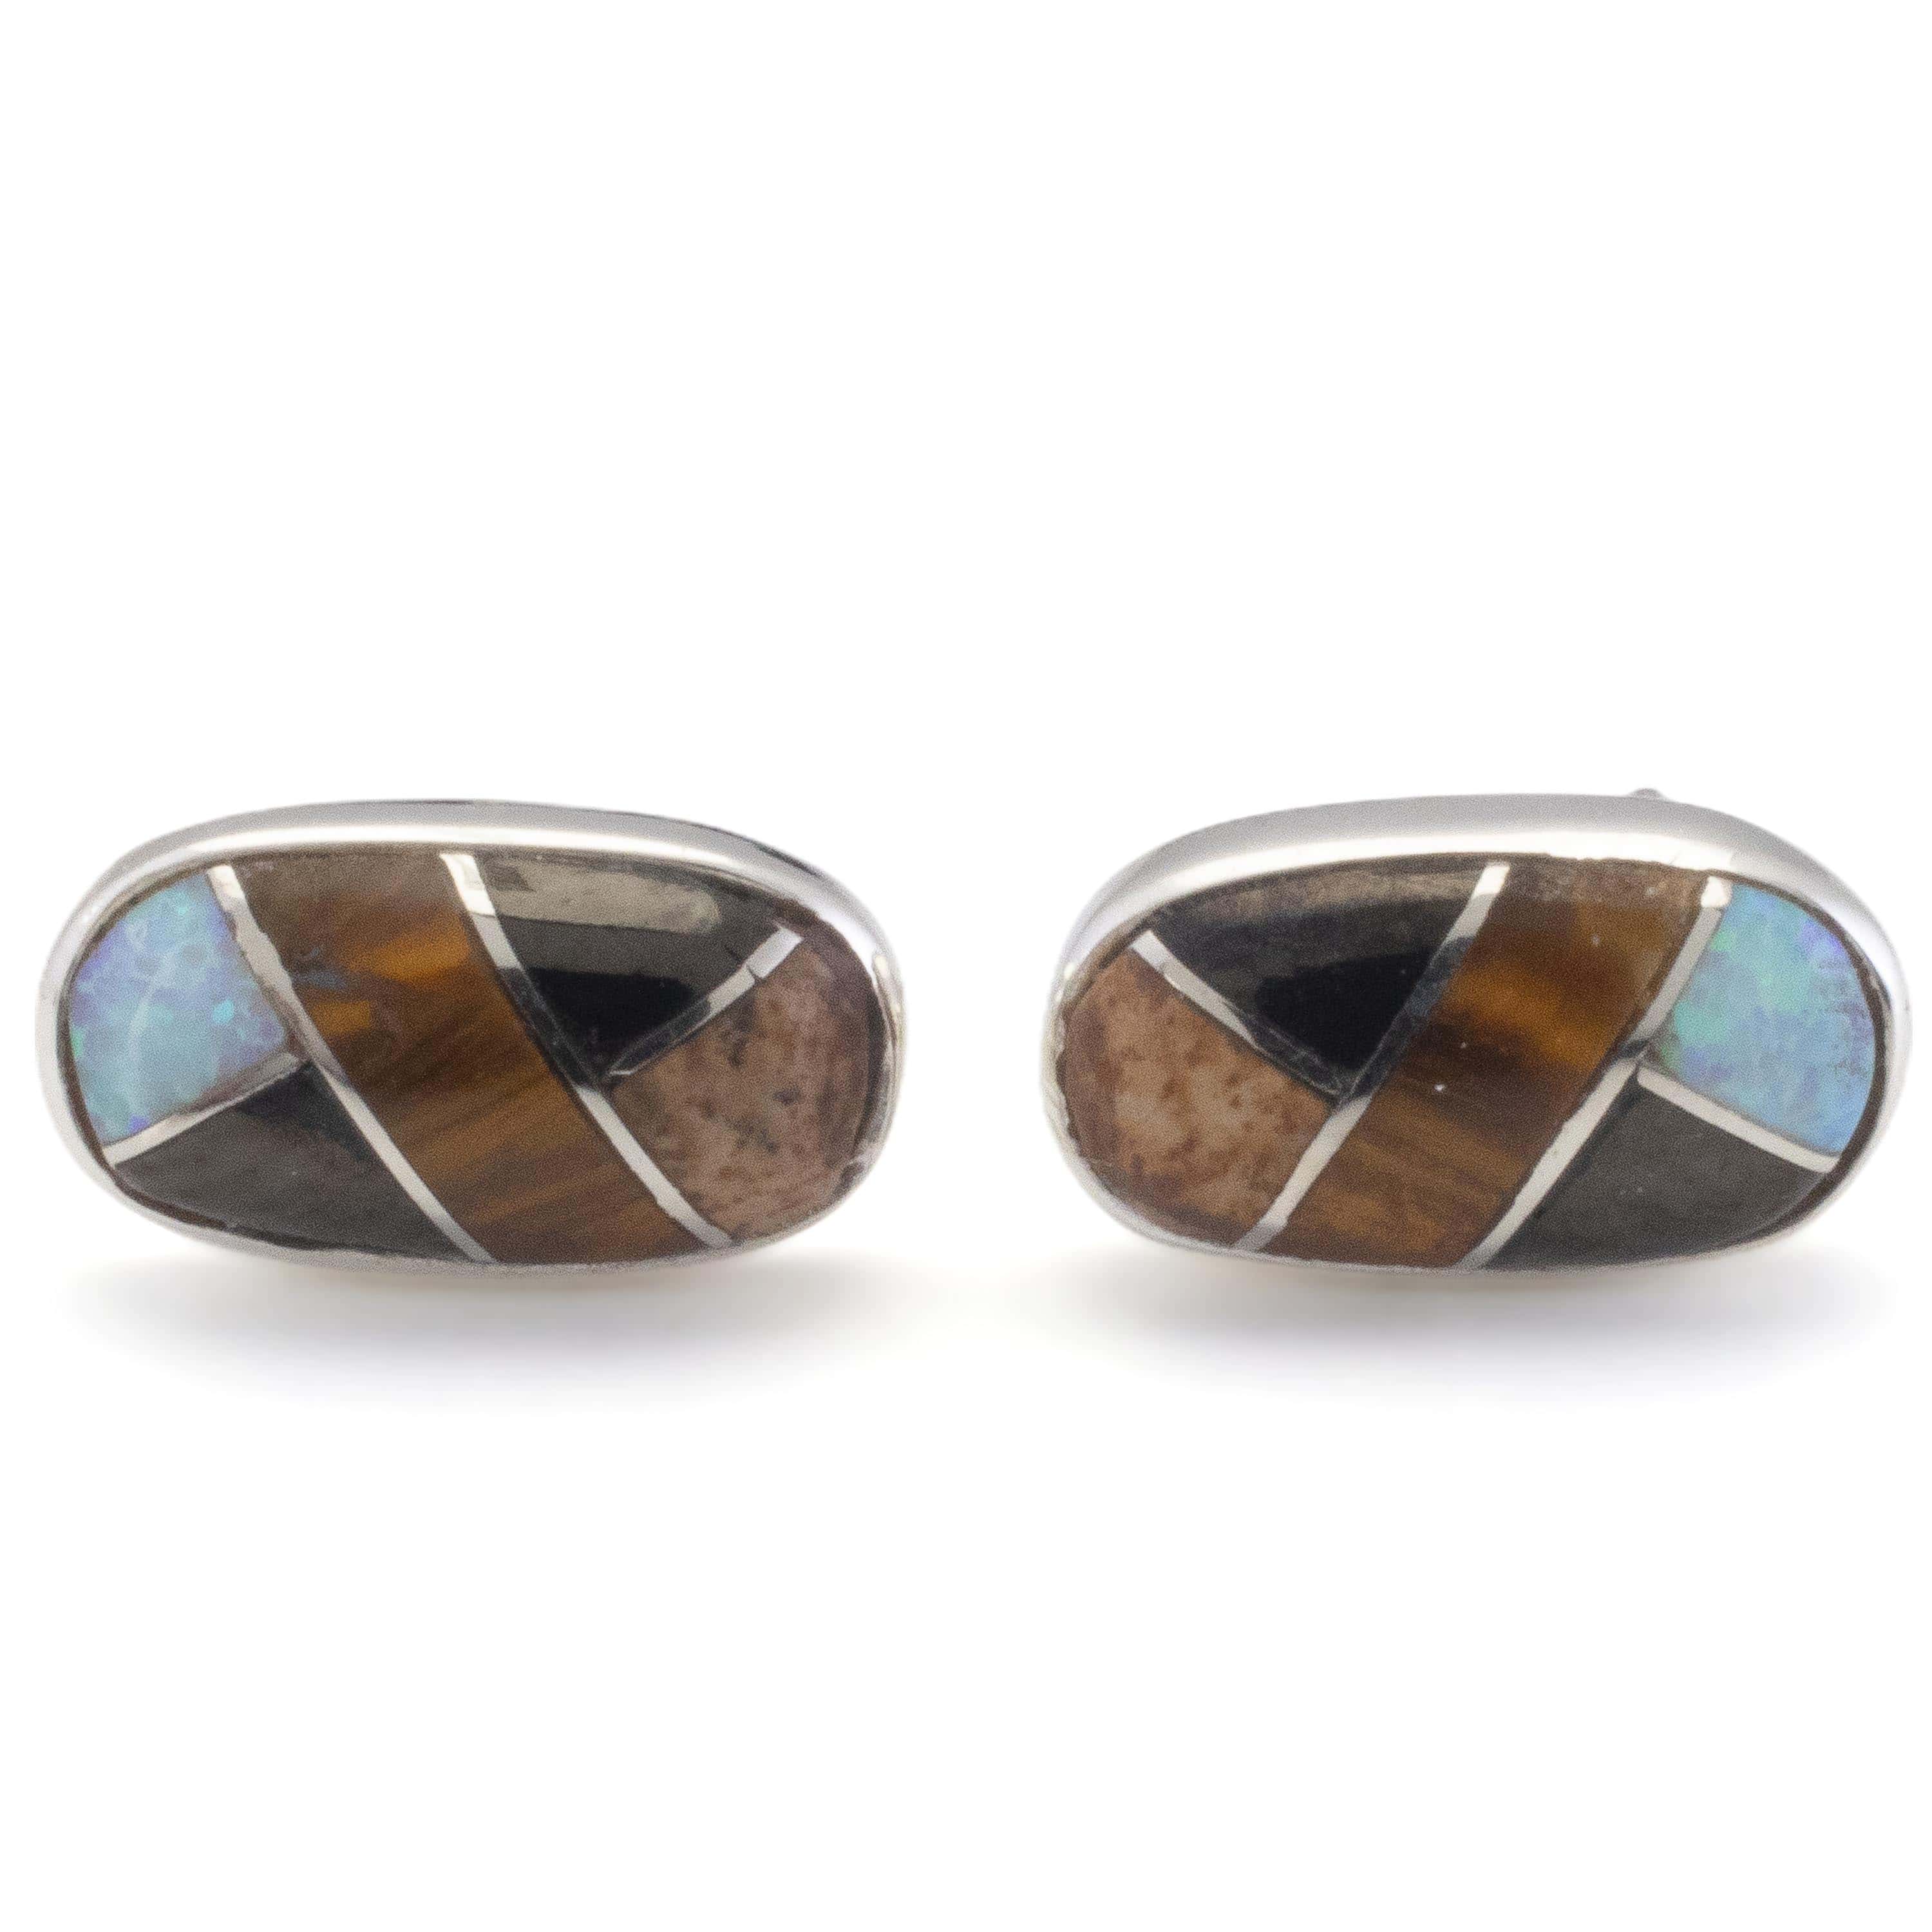 KALIFANO Southwest Silver Jewelry Tiger Eye Oval Sterling Silver Earrings with Stud Backing USA Handmade with Opal Accent NME.2238.TE